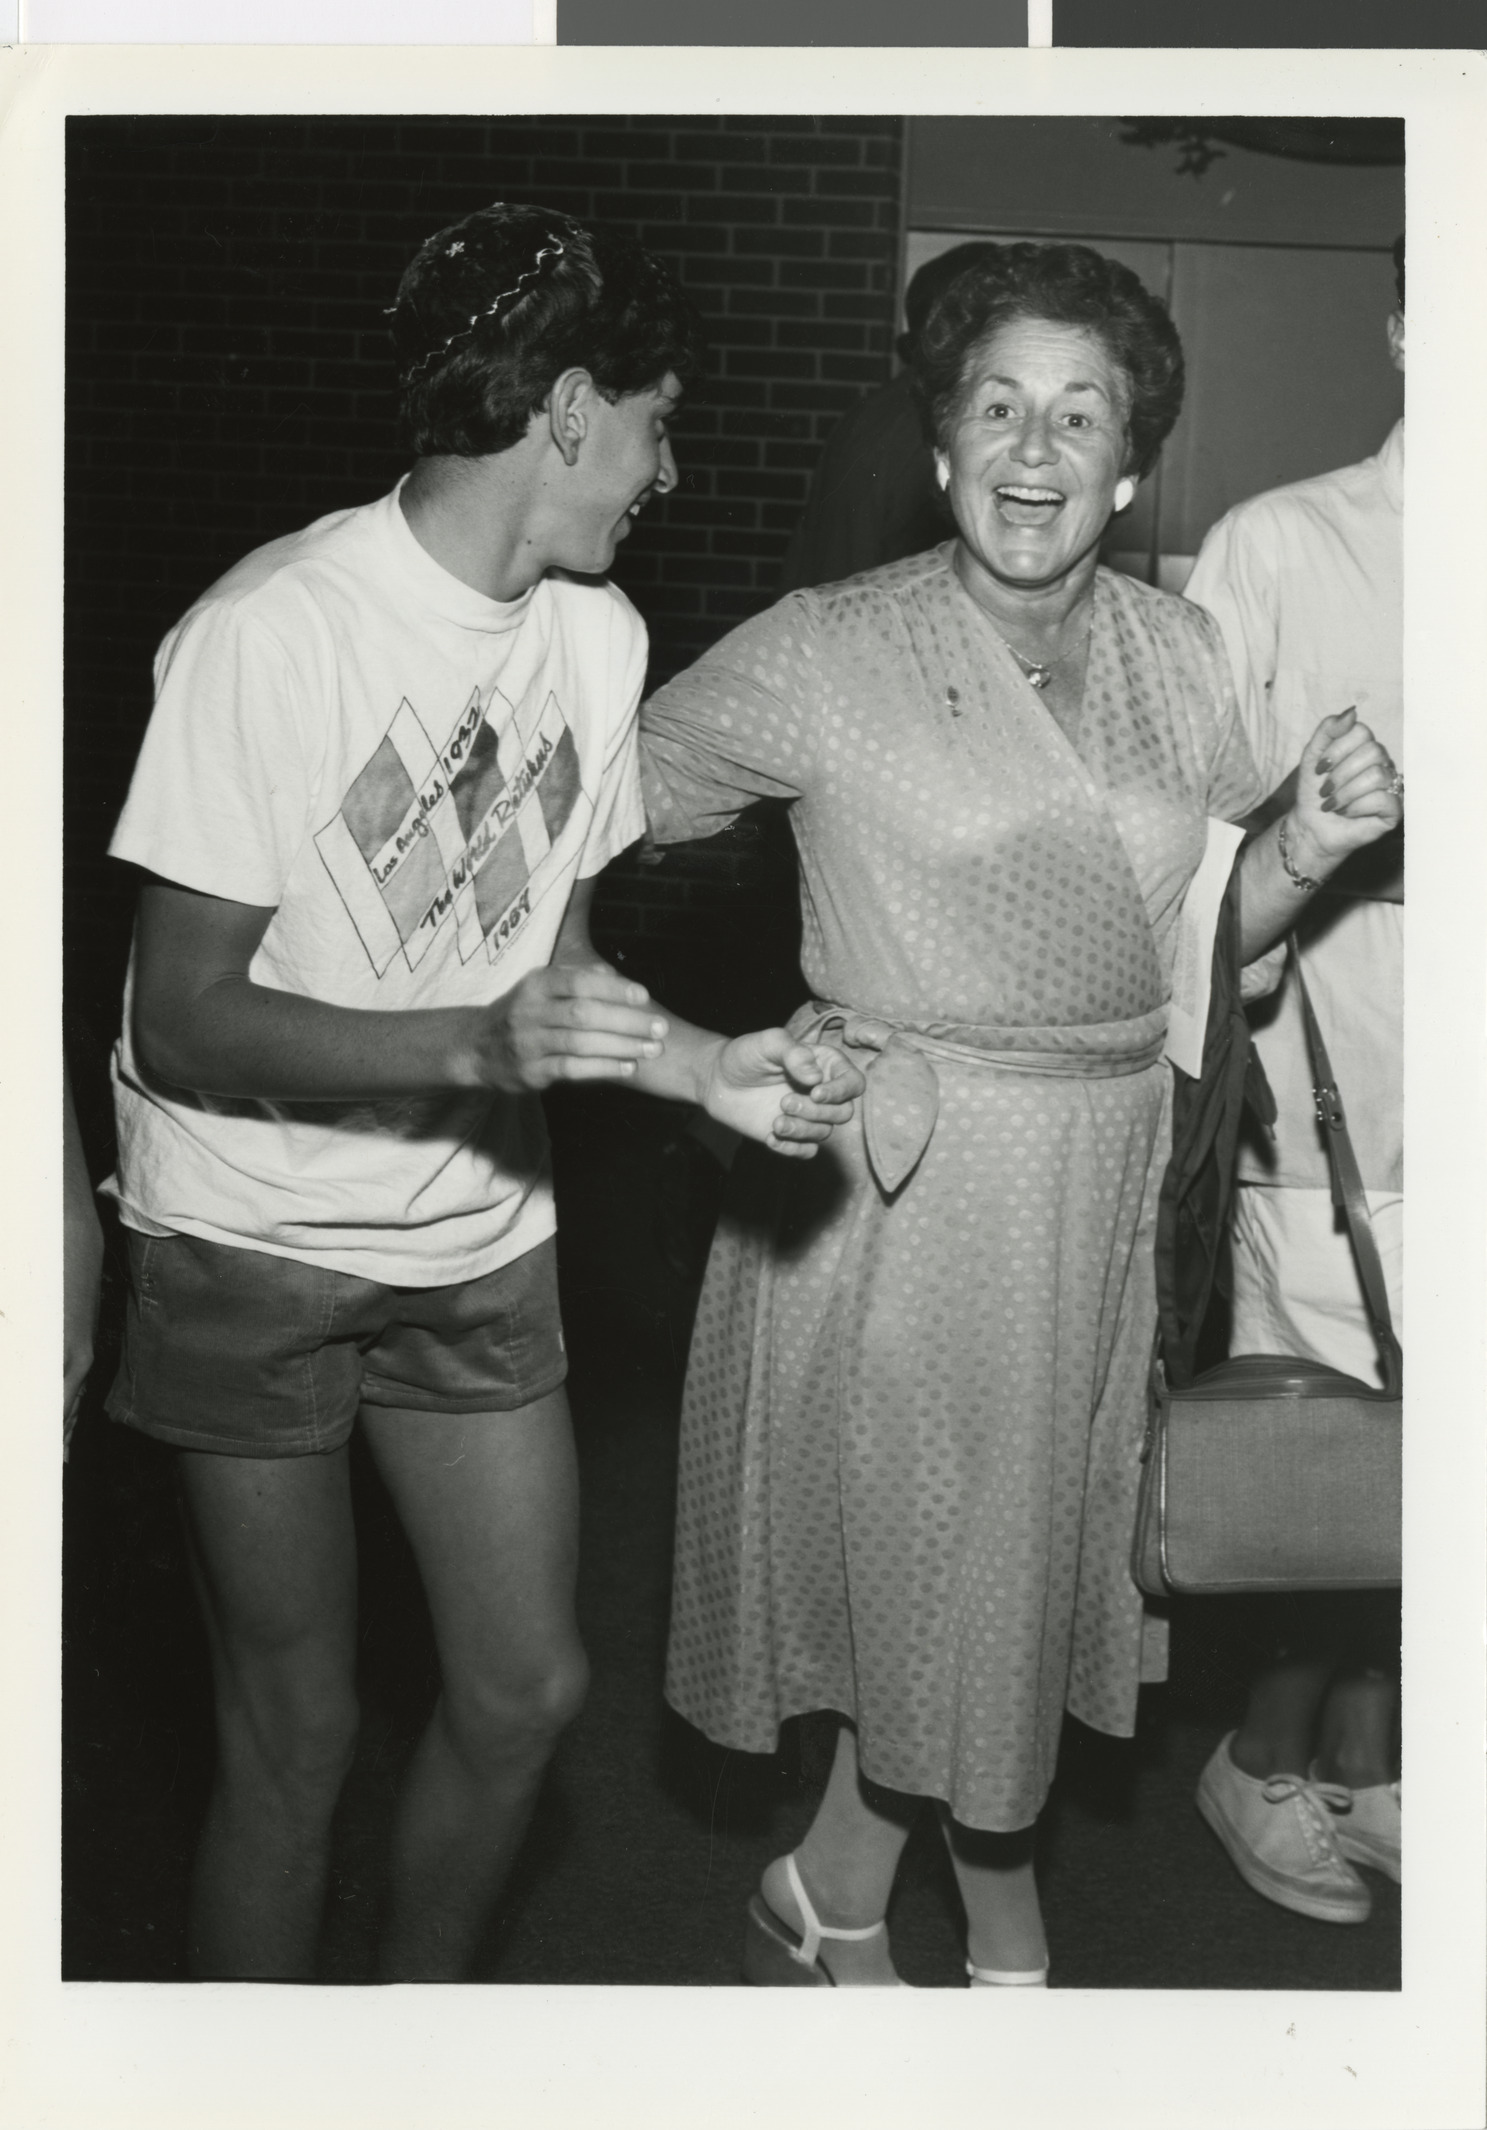 Photograph of Faye Steinberg dancing the "Hora" with U.S.Y., 1980s